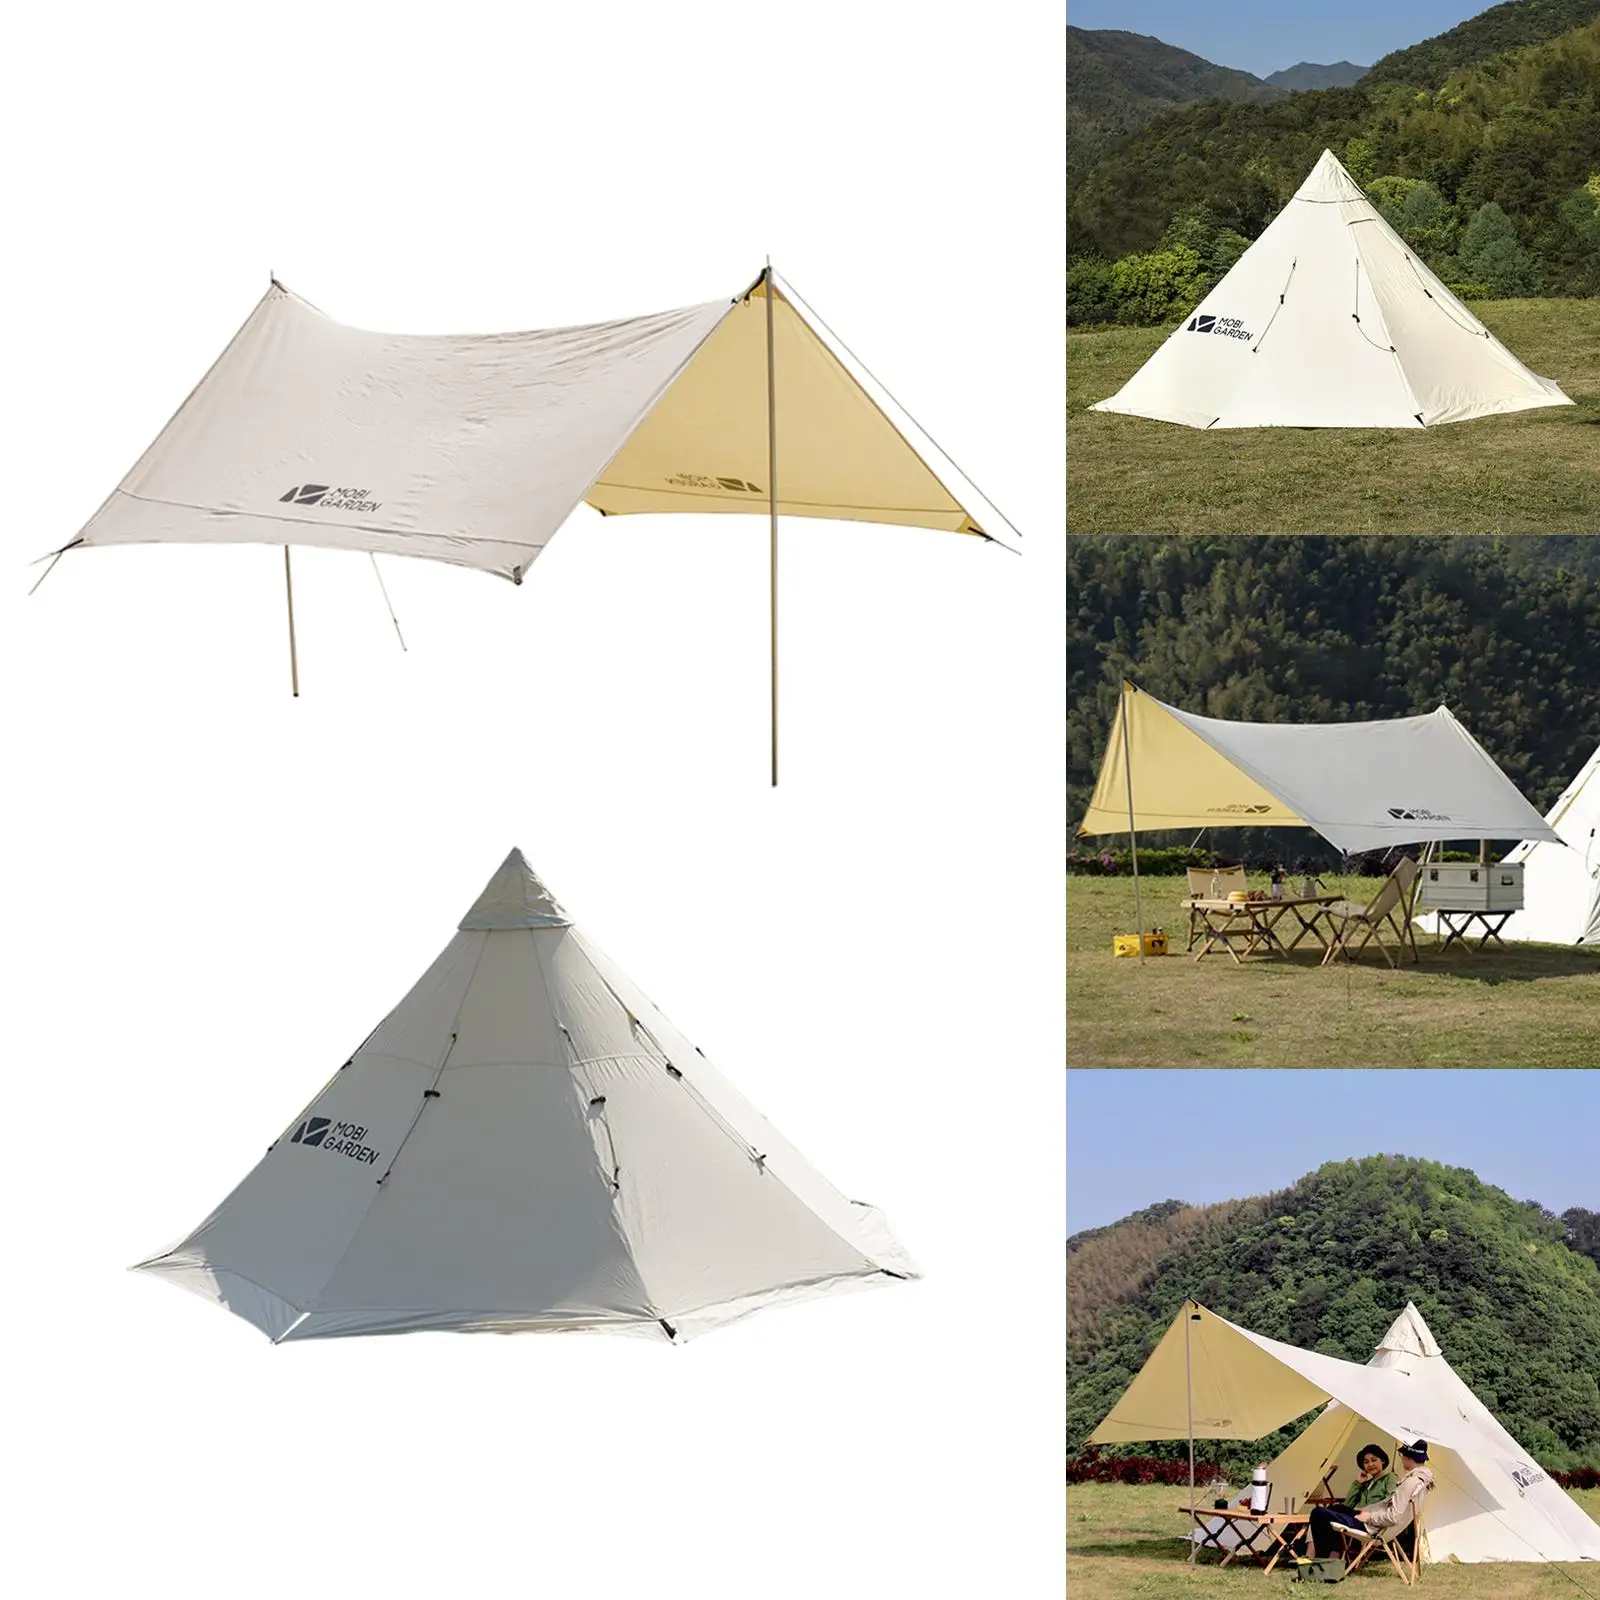 Outdoor Family Camping Tent Canopy Windproof Waterproof Lightweight Large Teepee Tents for Hiking Fishing Beach Travel Picnic